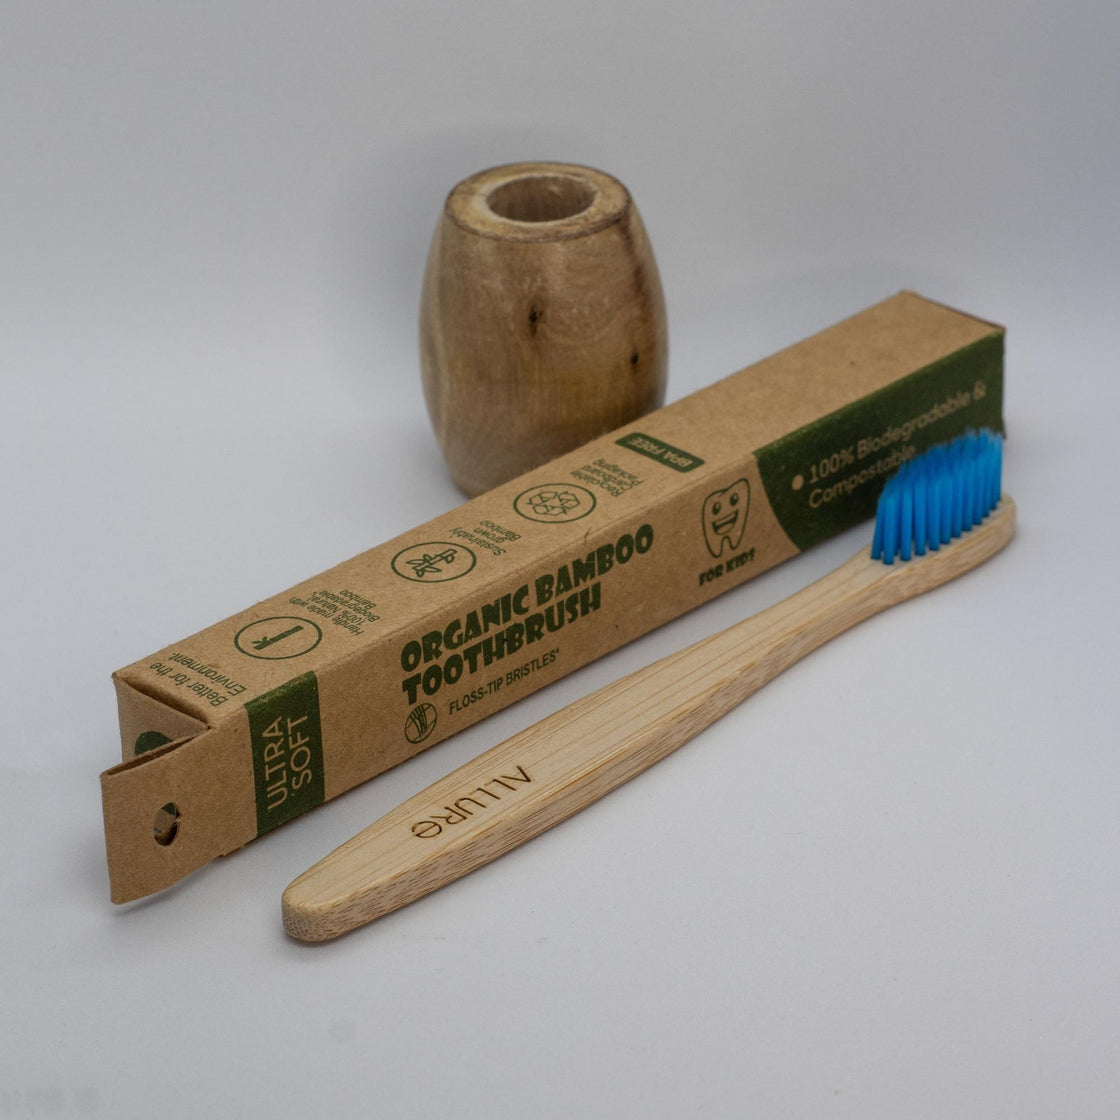 Allure Bamboo Toothbrush with Wooden Toothbrush stand